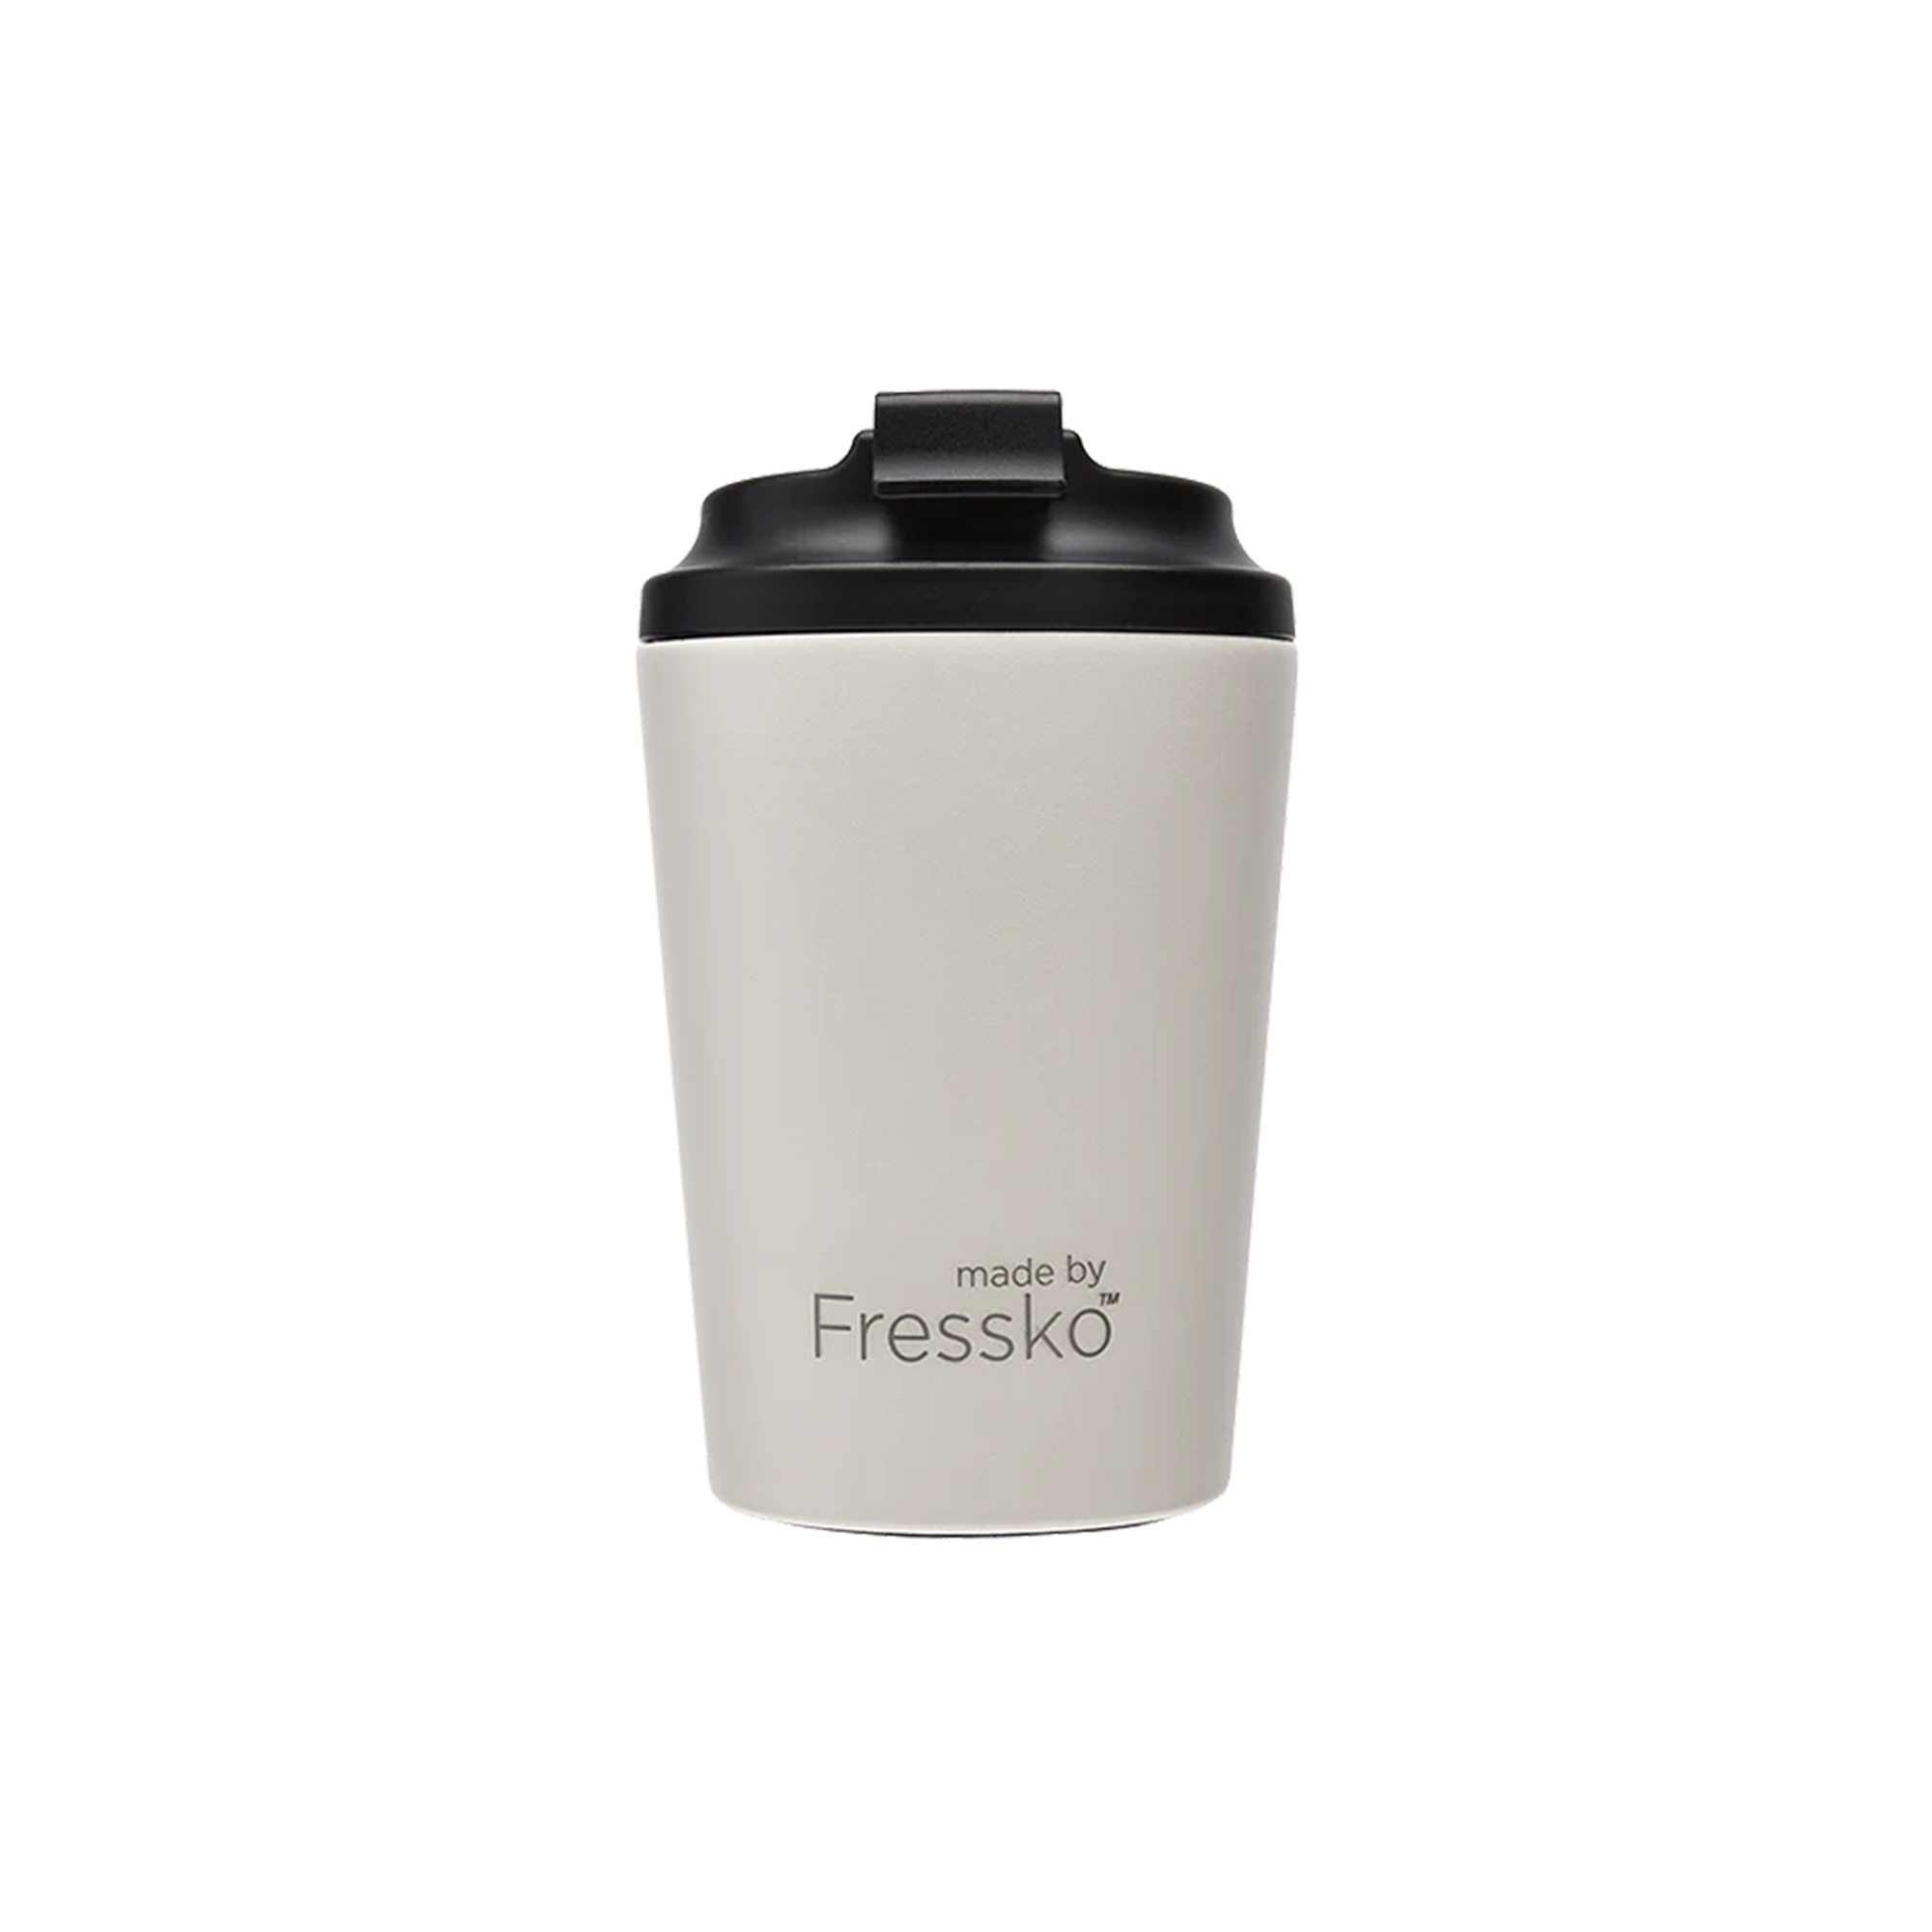 Camino Cup 340ml - Frost